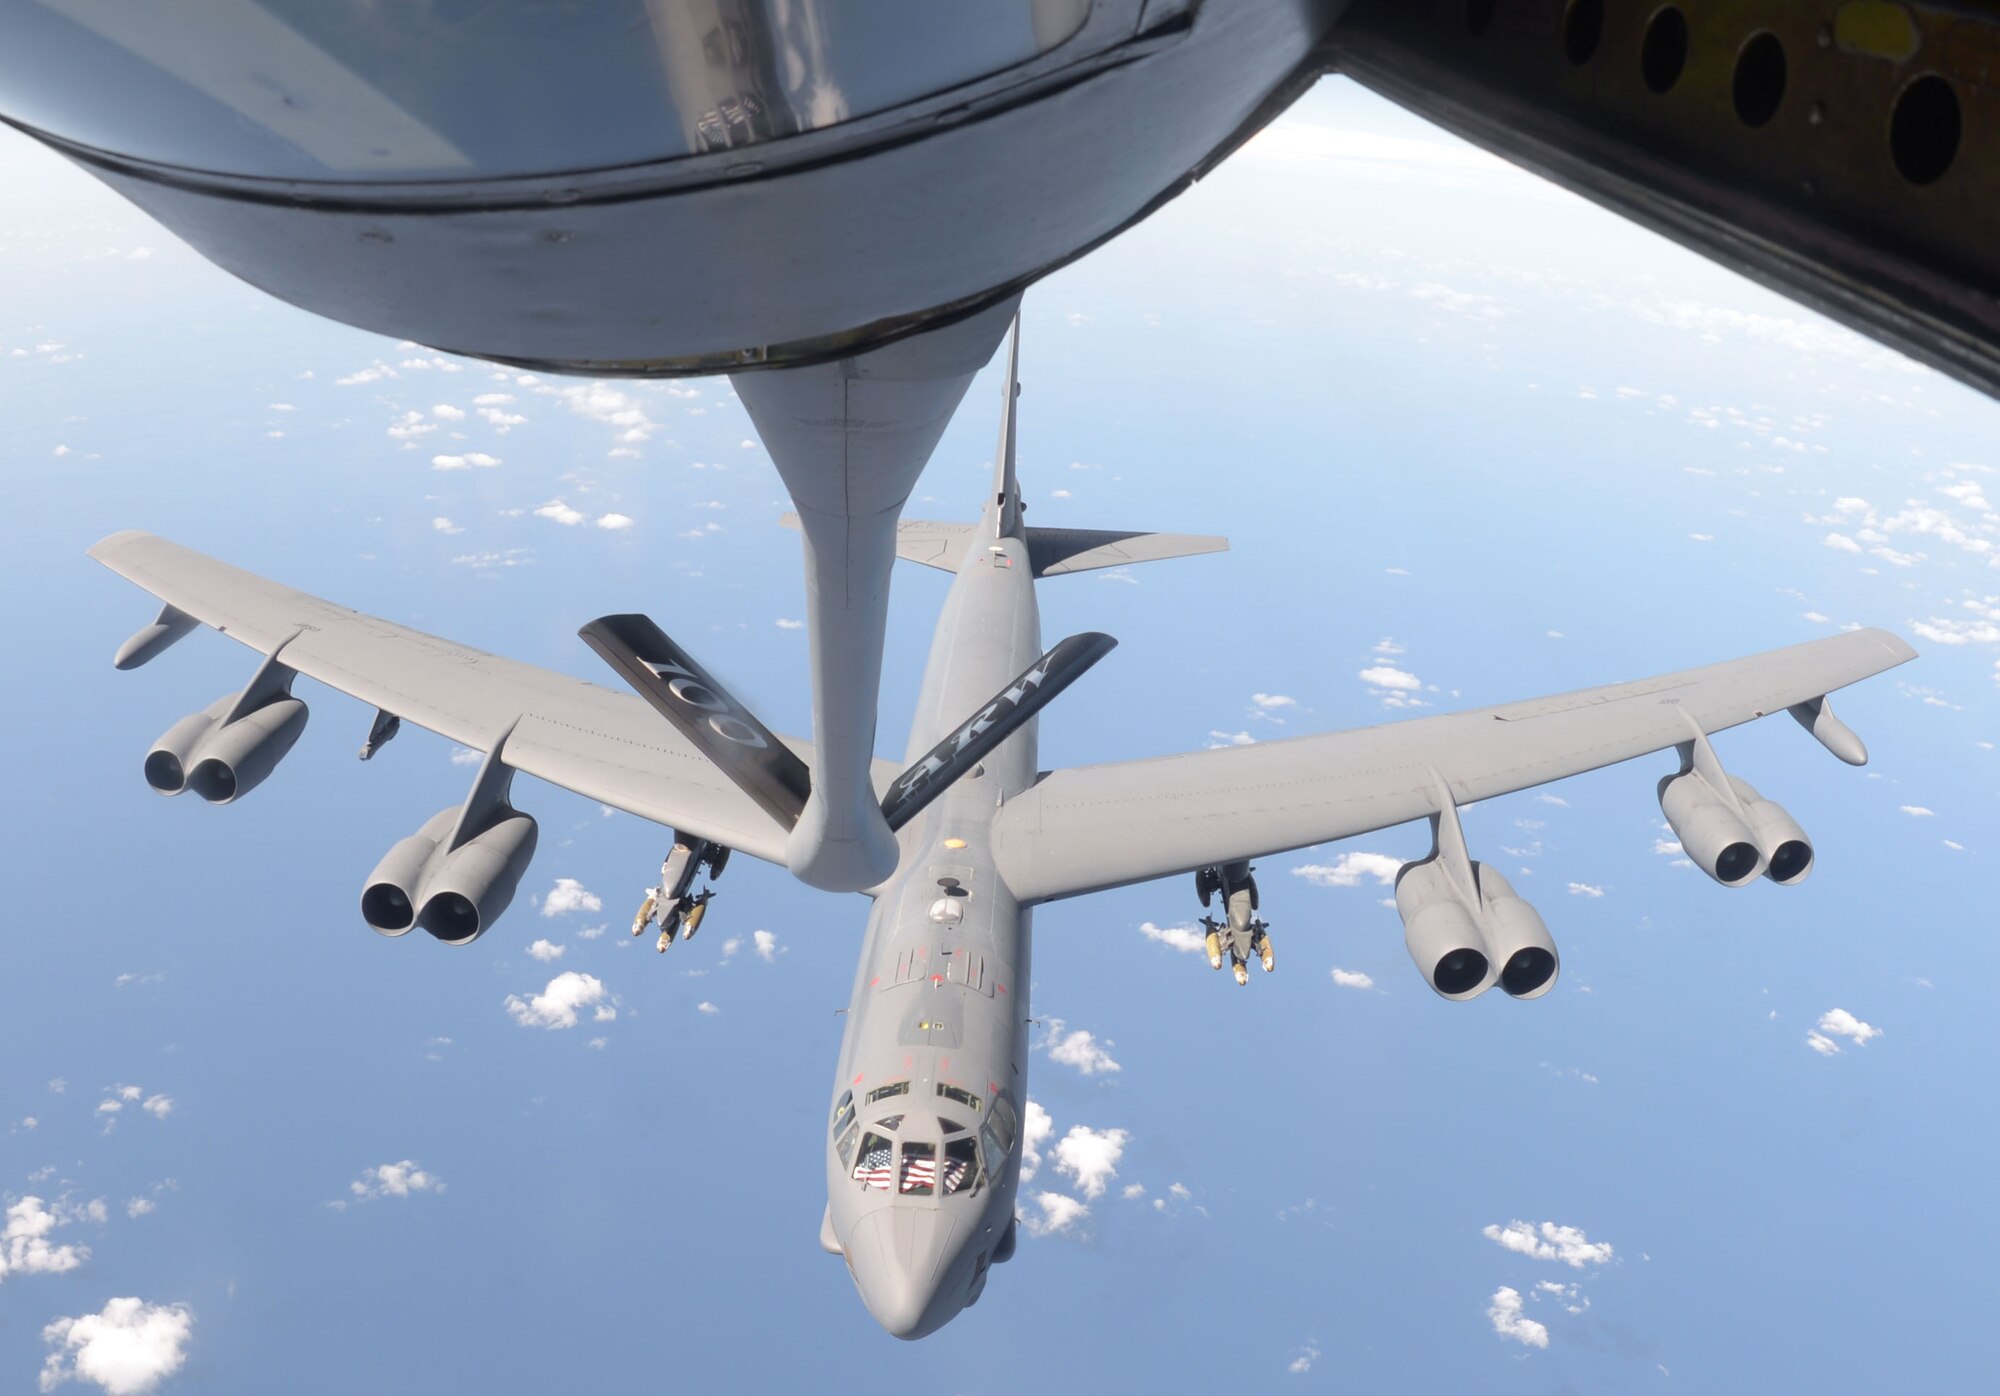 A U.S. Air Force B-52 Stratofortress from Barksdale Air Force Base, La, moves away from a KC-135 Stratotanker from RAF Mildenhall, England, after refueling Sept. 27, 2017, over the Mediterranean Sea. Part of the B-52’s training during its deployment includes releasing inert ordnance while flying over controlled airspace areas of the Netherlands and the United Kingdom.  (U.S. Air Force photo by Airman 1st Class Benjamin Cooper)